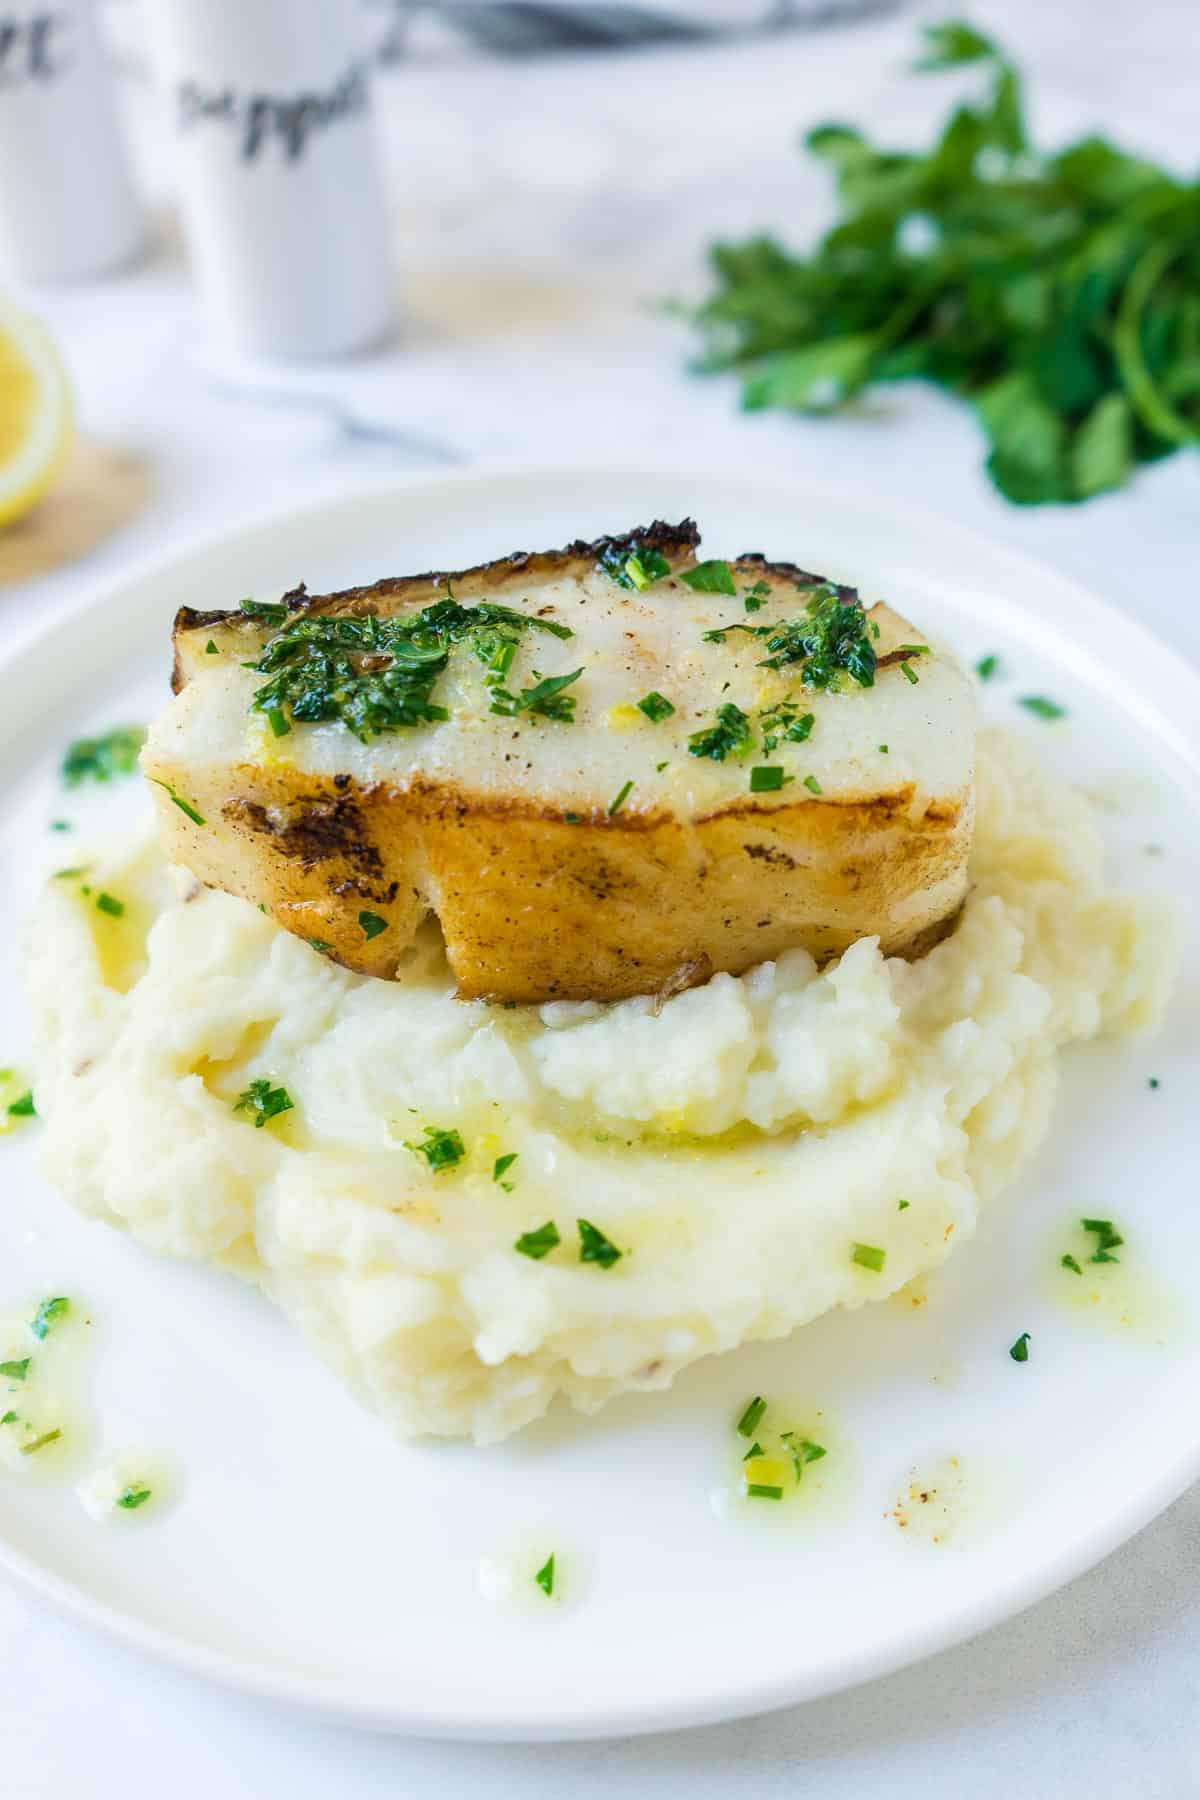 Pan seared Chilean Sea Bass on a plate with mashed potatoes drizzled with the herb butter sauce.